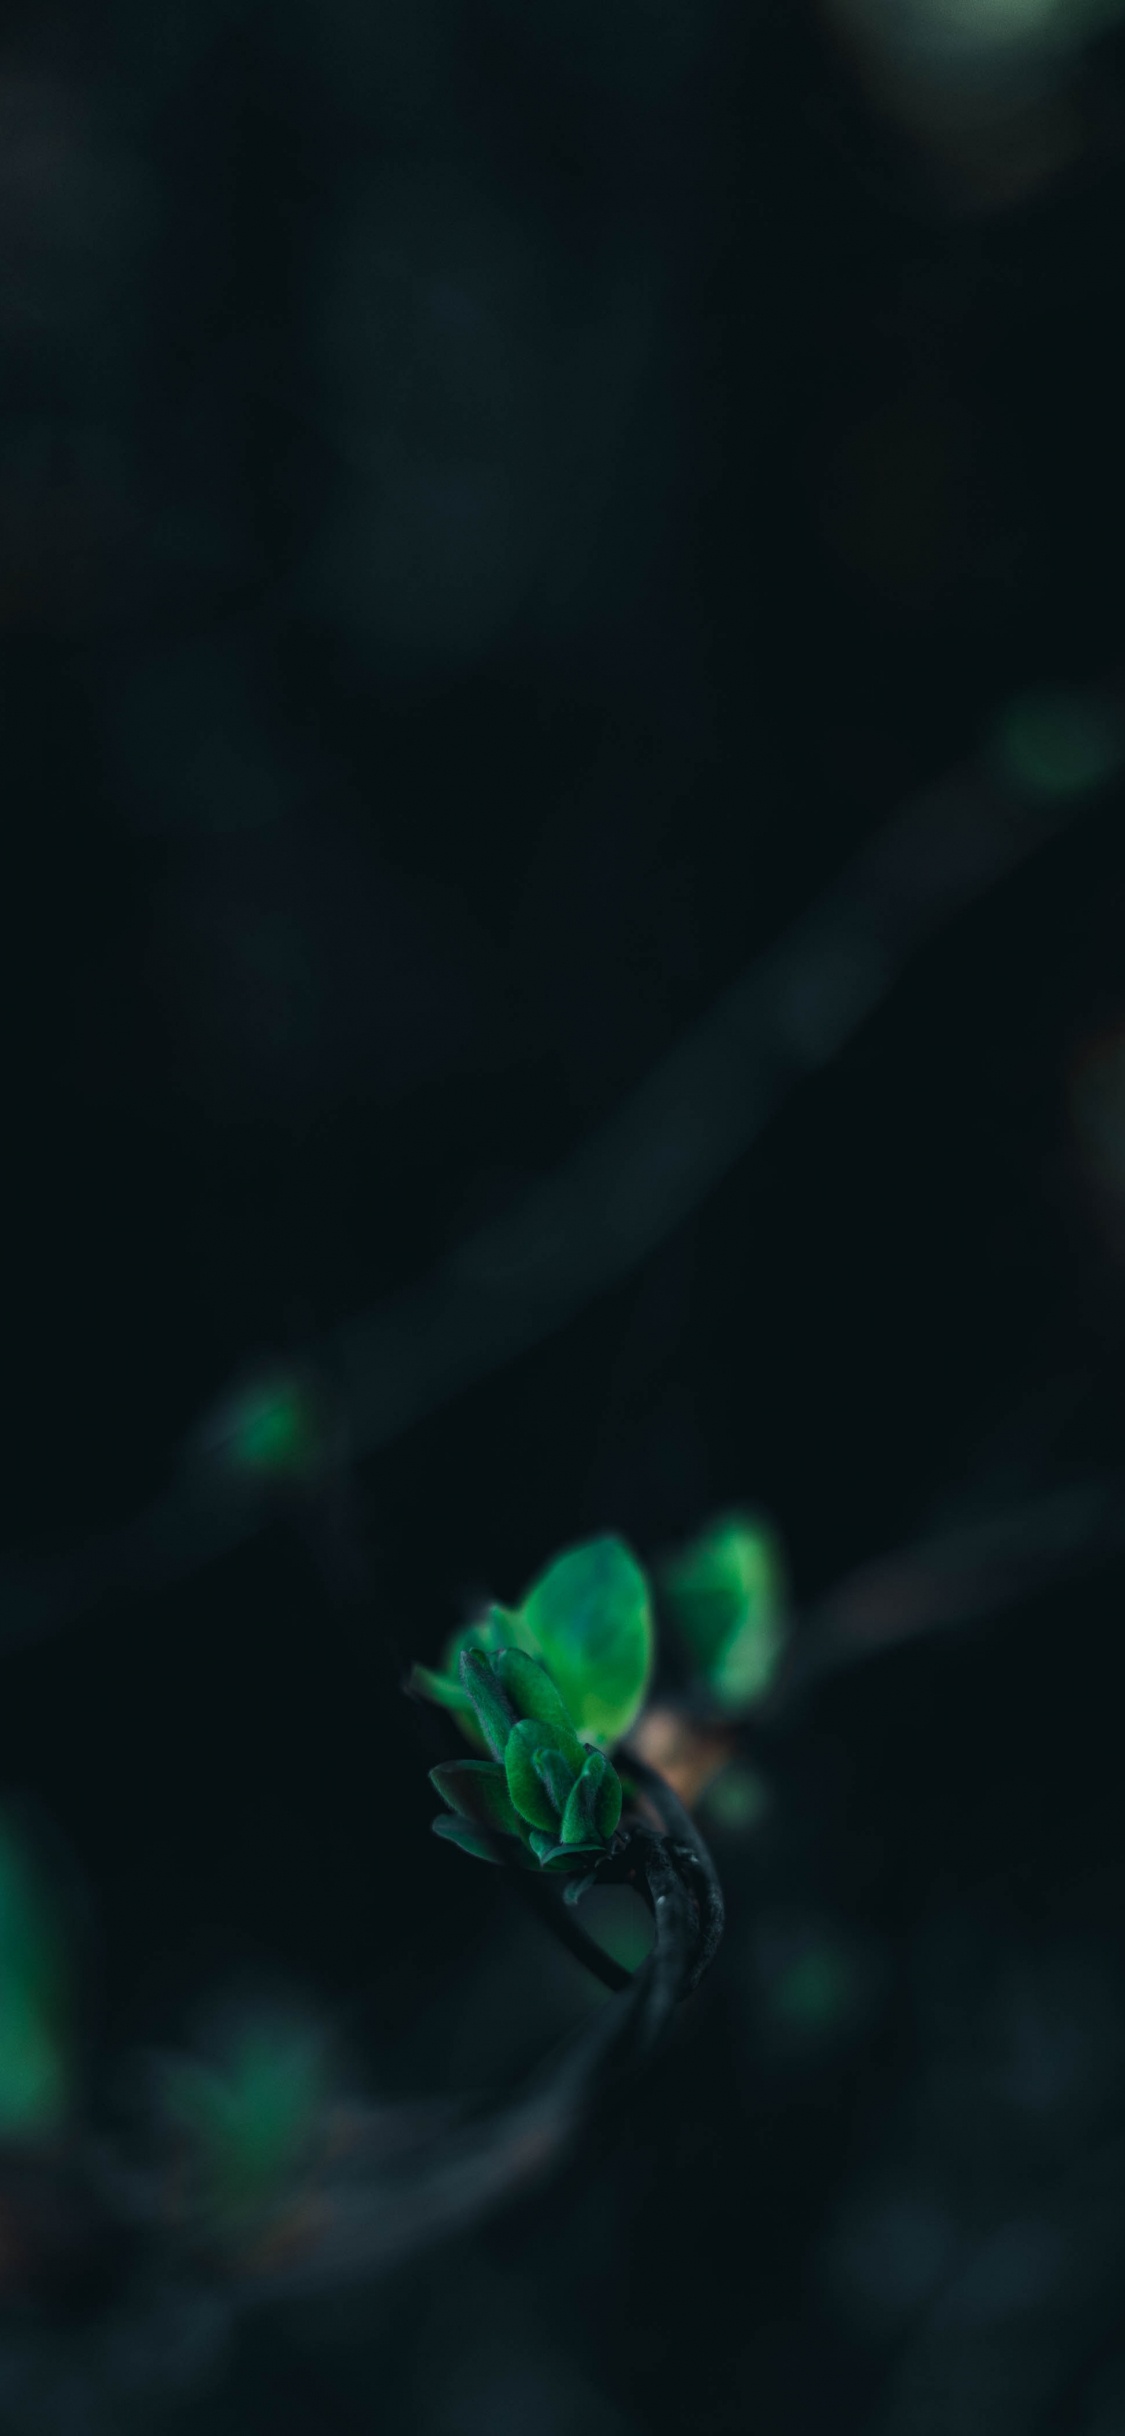 Green, Black, Water, Turquoise, Light. Wallpaper in 1125x2436 Resolution